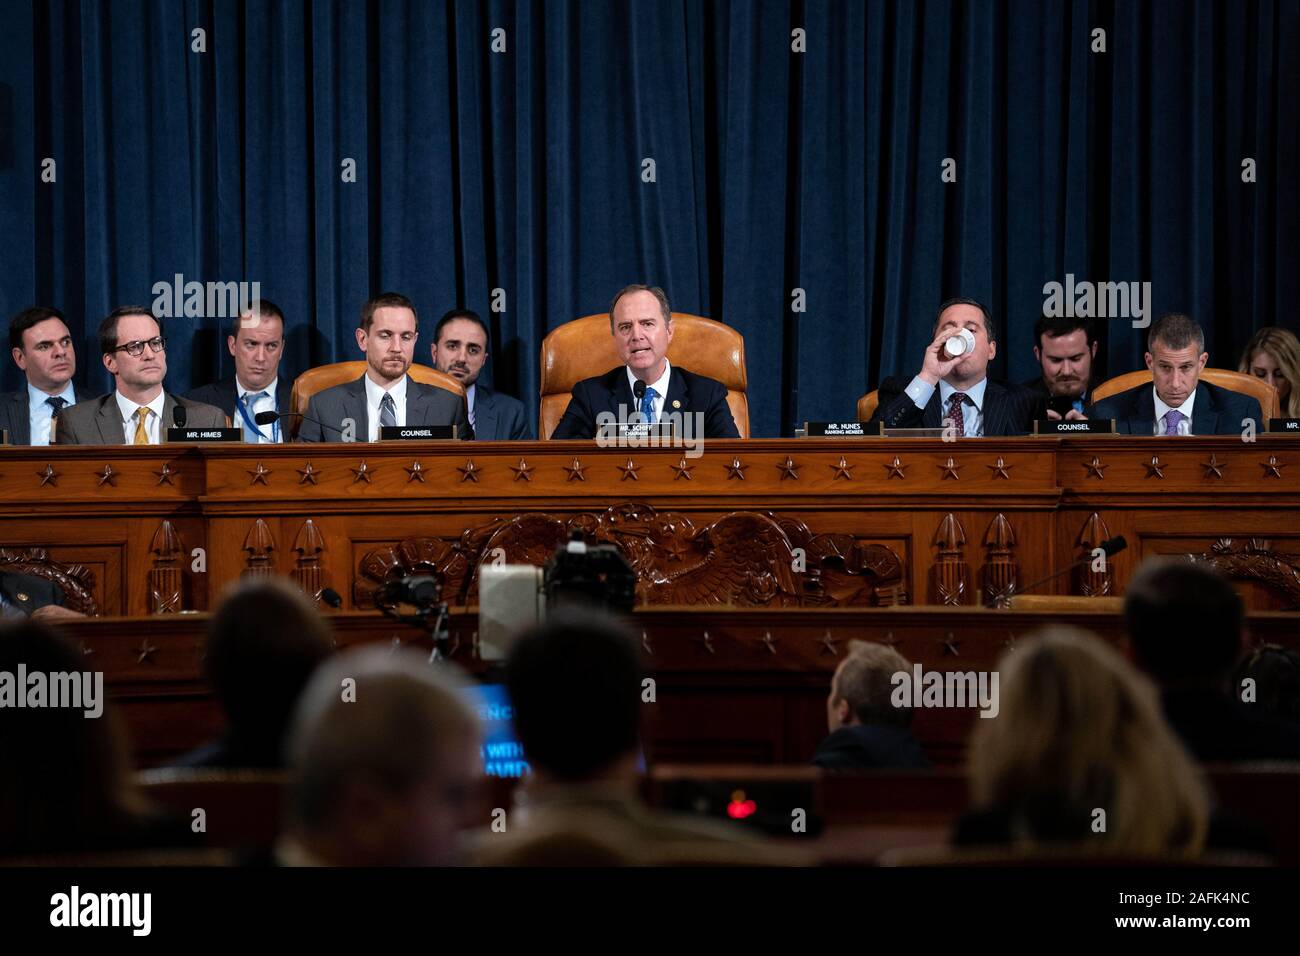 November 20, 2019, Washington, District of Columbia, USA: United States Representative Adam Schiff (Democrat of California), Chairman, US House Permanent Select Committee on Intelligence, left, joined by United States Representative Devin Nunes (Republican of California), Ranking Member, US House Permanent Select Committee on Intelligence, right, gives closing remarks during a US House Intelligence Committee impeachment inquiry hearing with Laura Cooper, deputy assistant secretary of defense for Russia, Ukraine and Eurasia, and David Hale, undersecretary of state for political affairs, on Capi Stock Photo